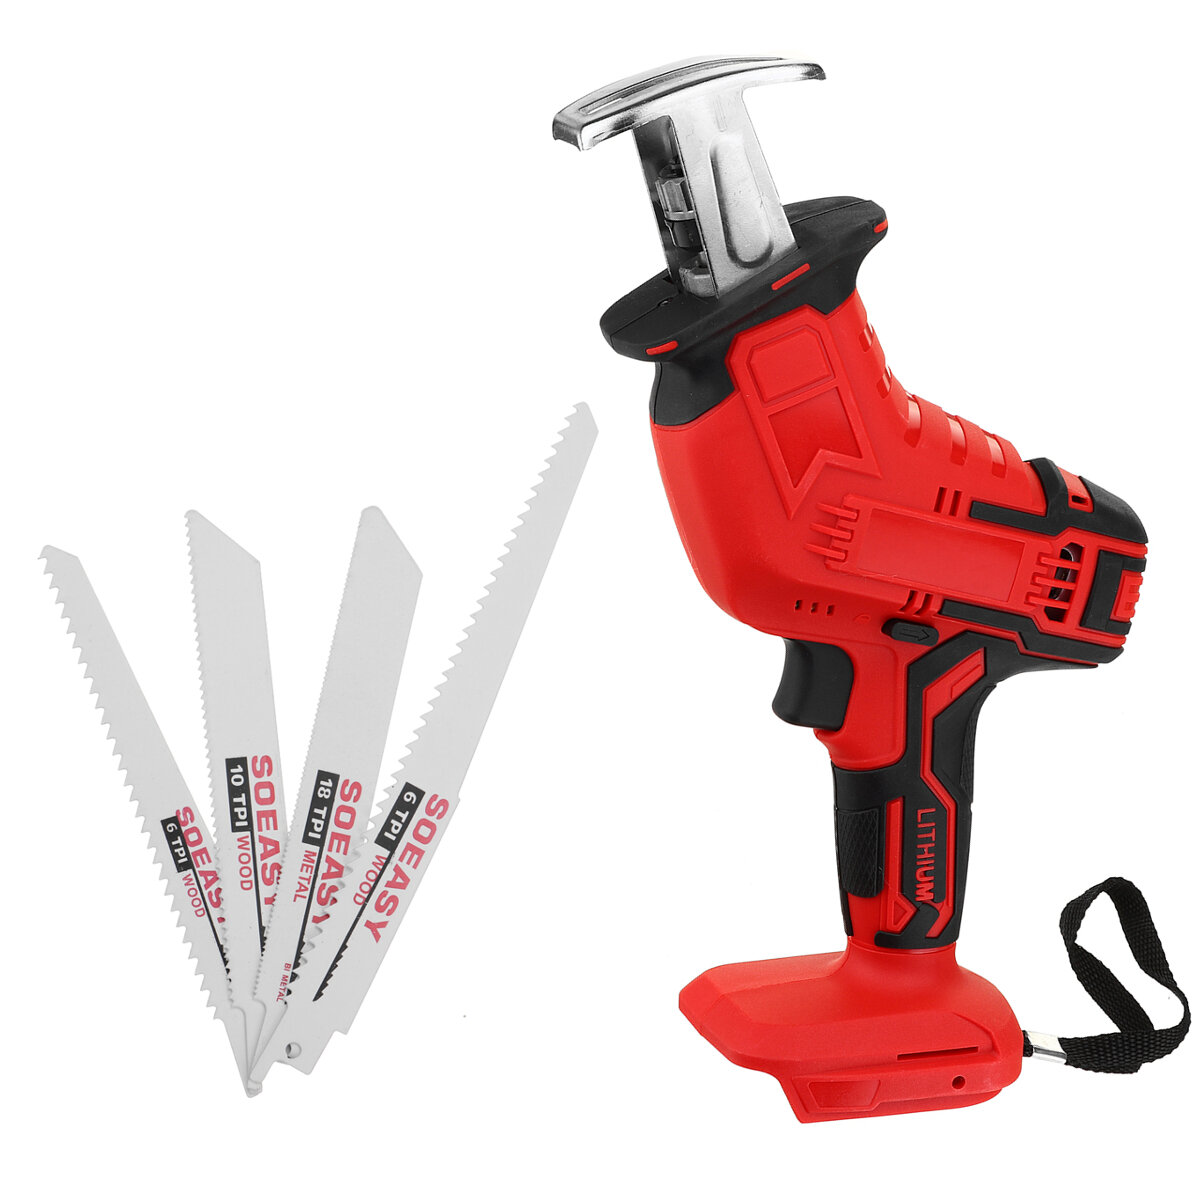 Cordless Reciprocating Saw Electric Saw Wood Work Tool With 4 x Reciprocating Blades Fit Makita